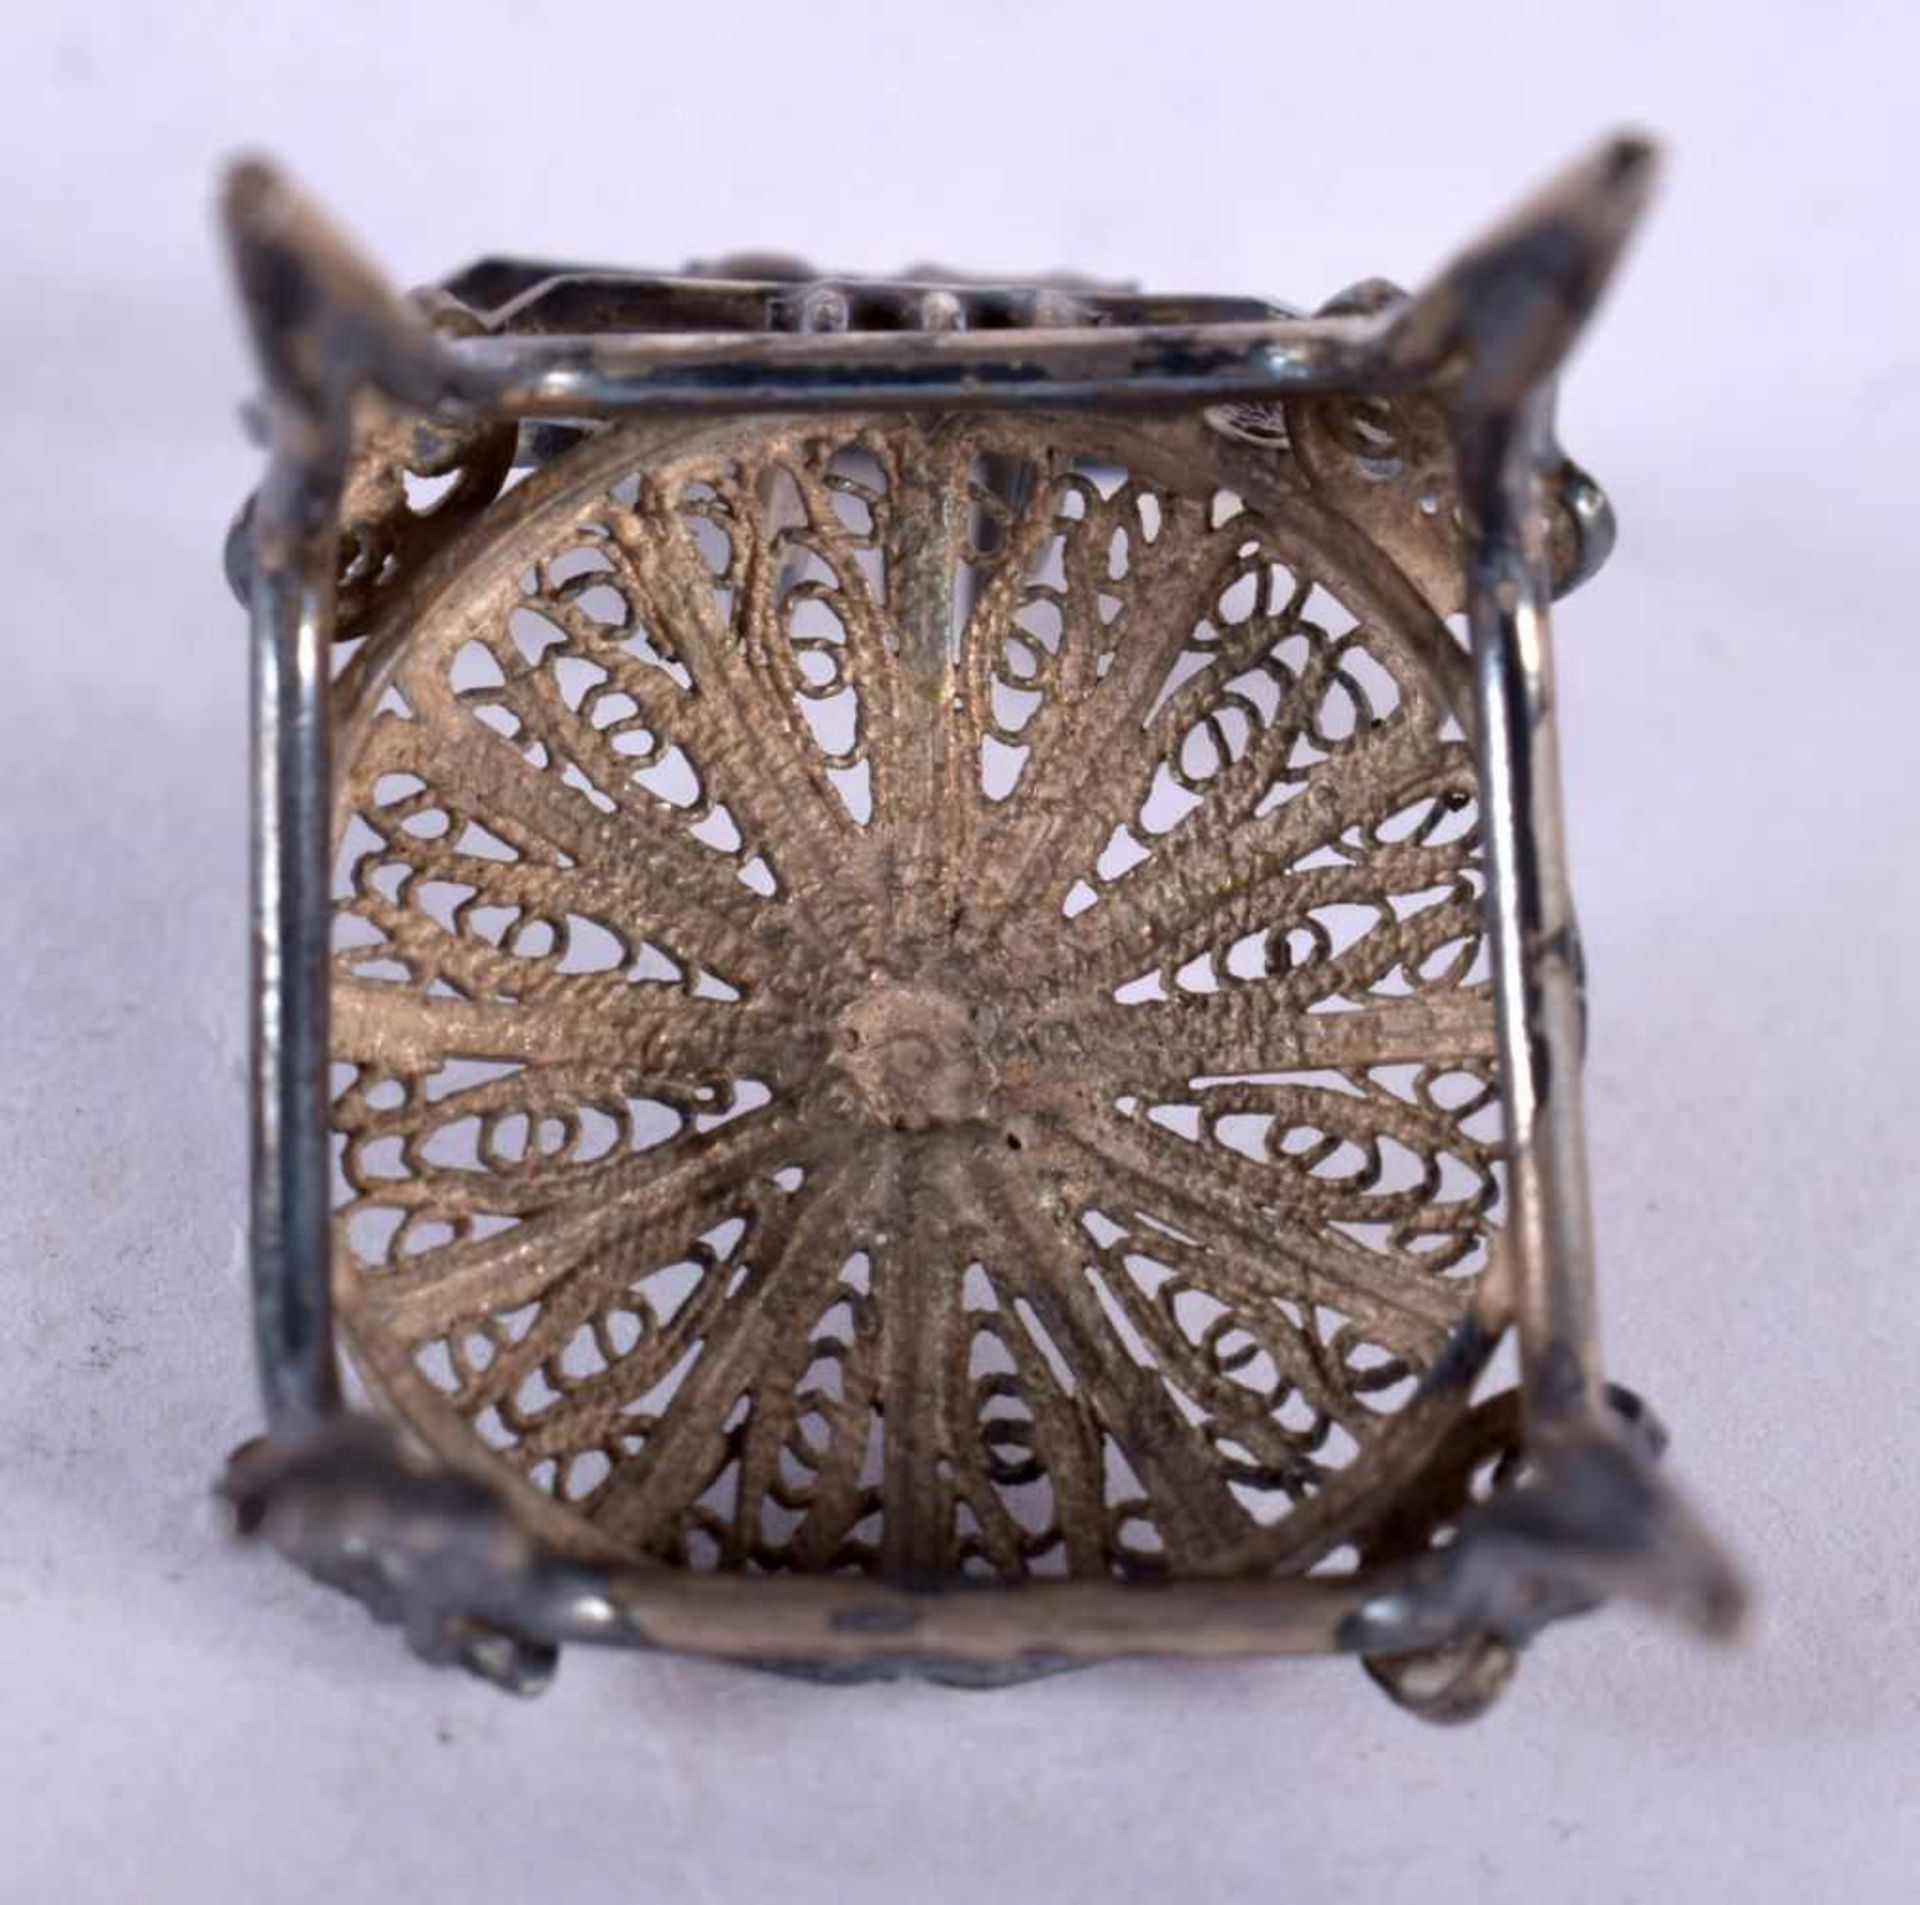 A Silver Filigree Dolls House Furniture Chair. 3.8cm x 2.1cm x 2.4cm, weight 5.5g. Good Condition - Image 4 of 4